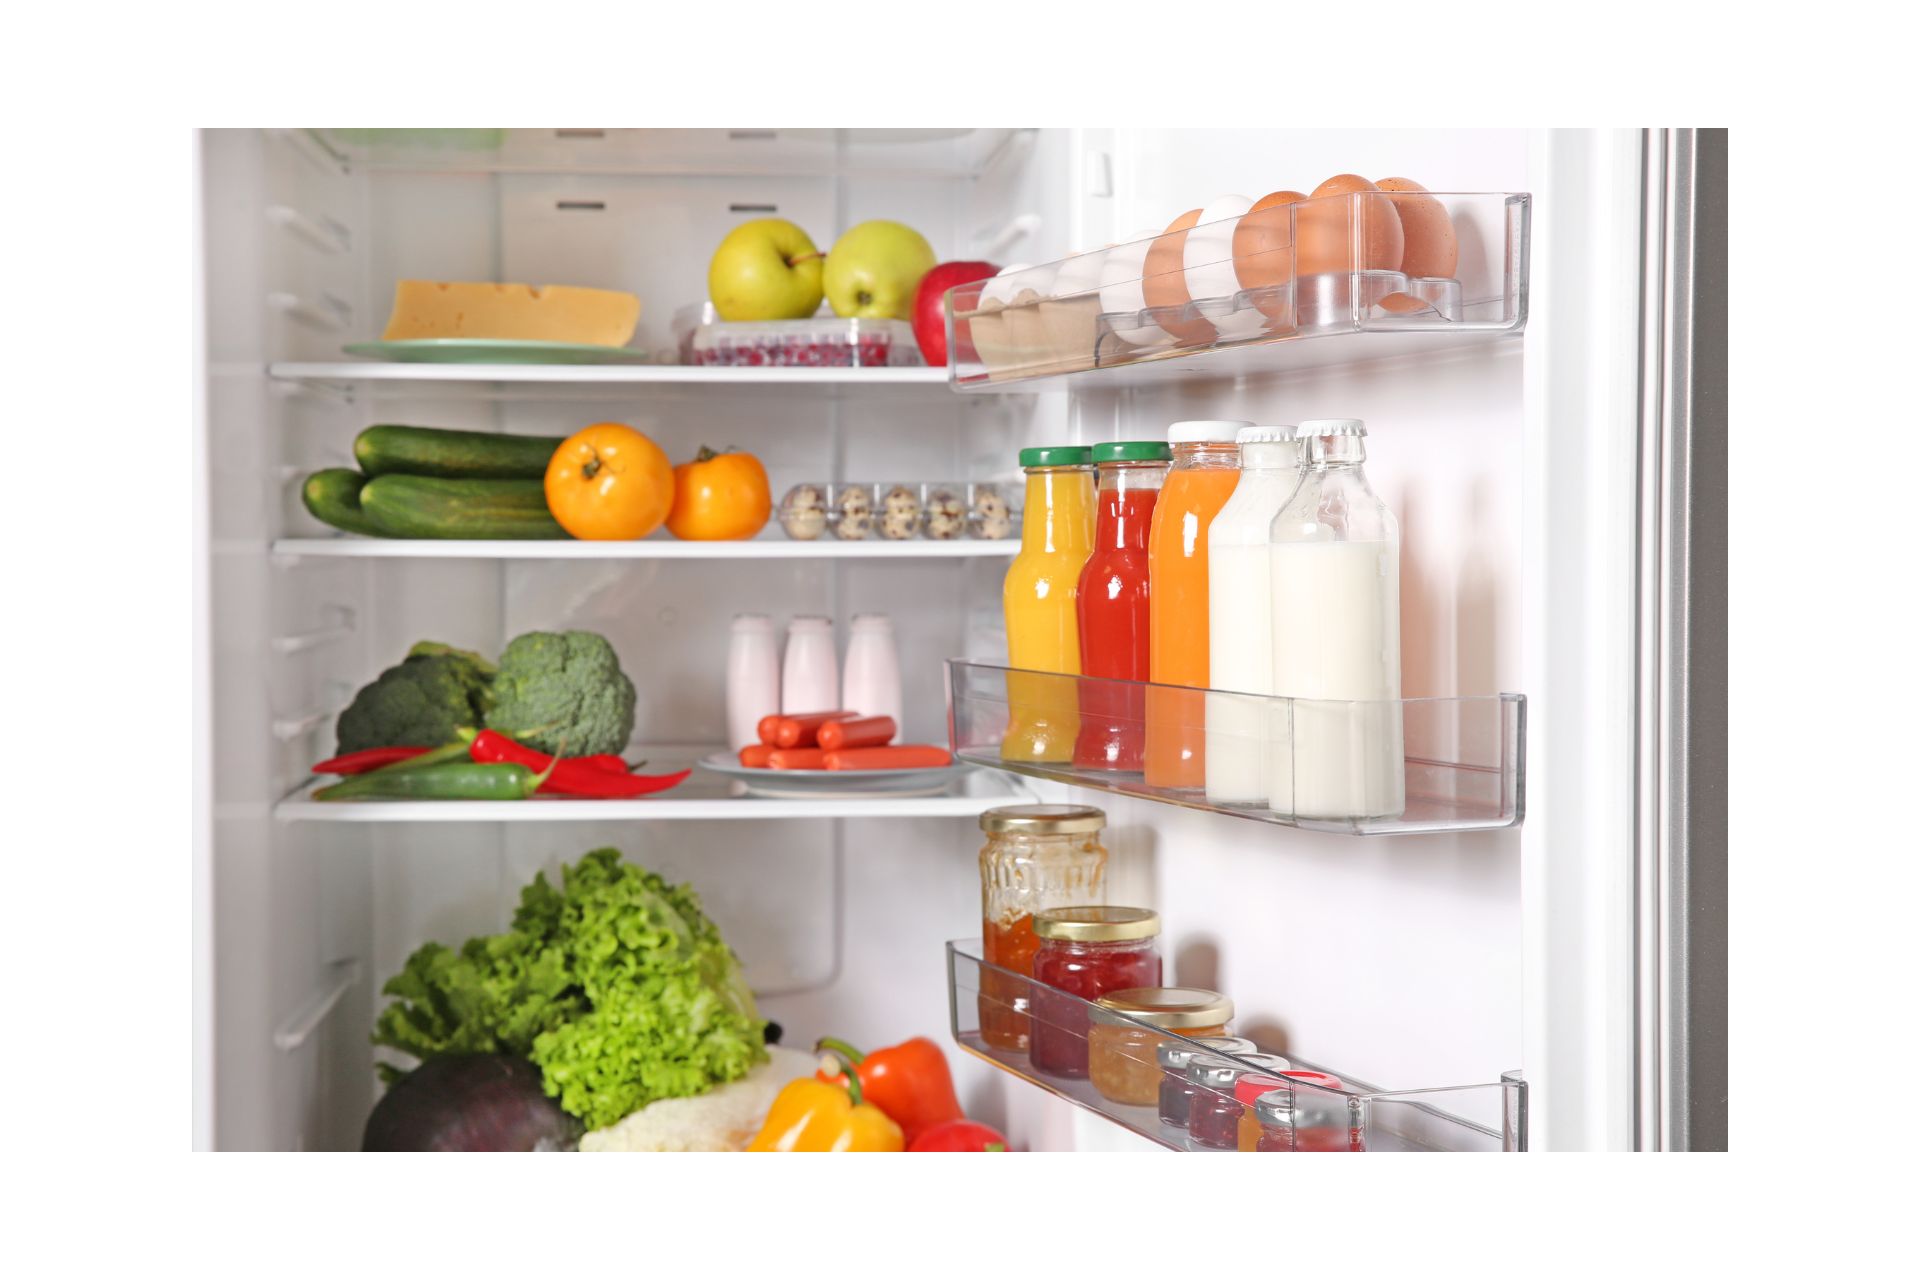 Tips for Maintaining a Refrigerator to Prevent Future Cooling Problems